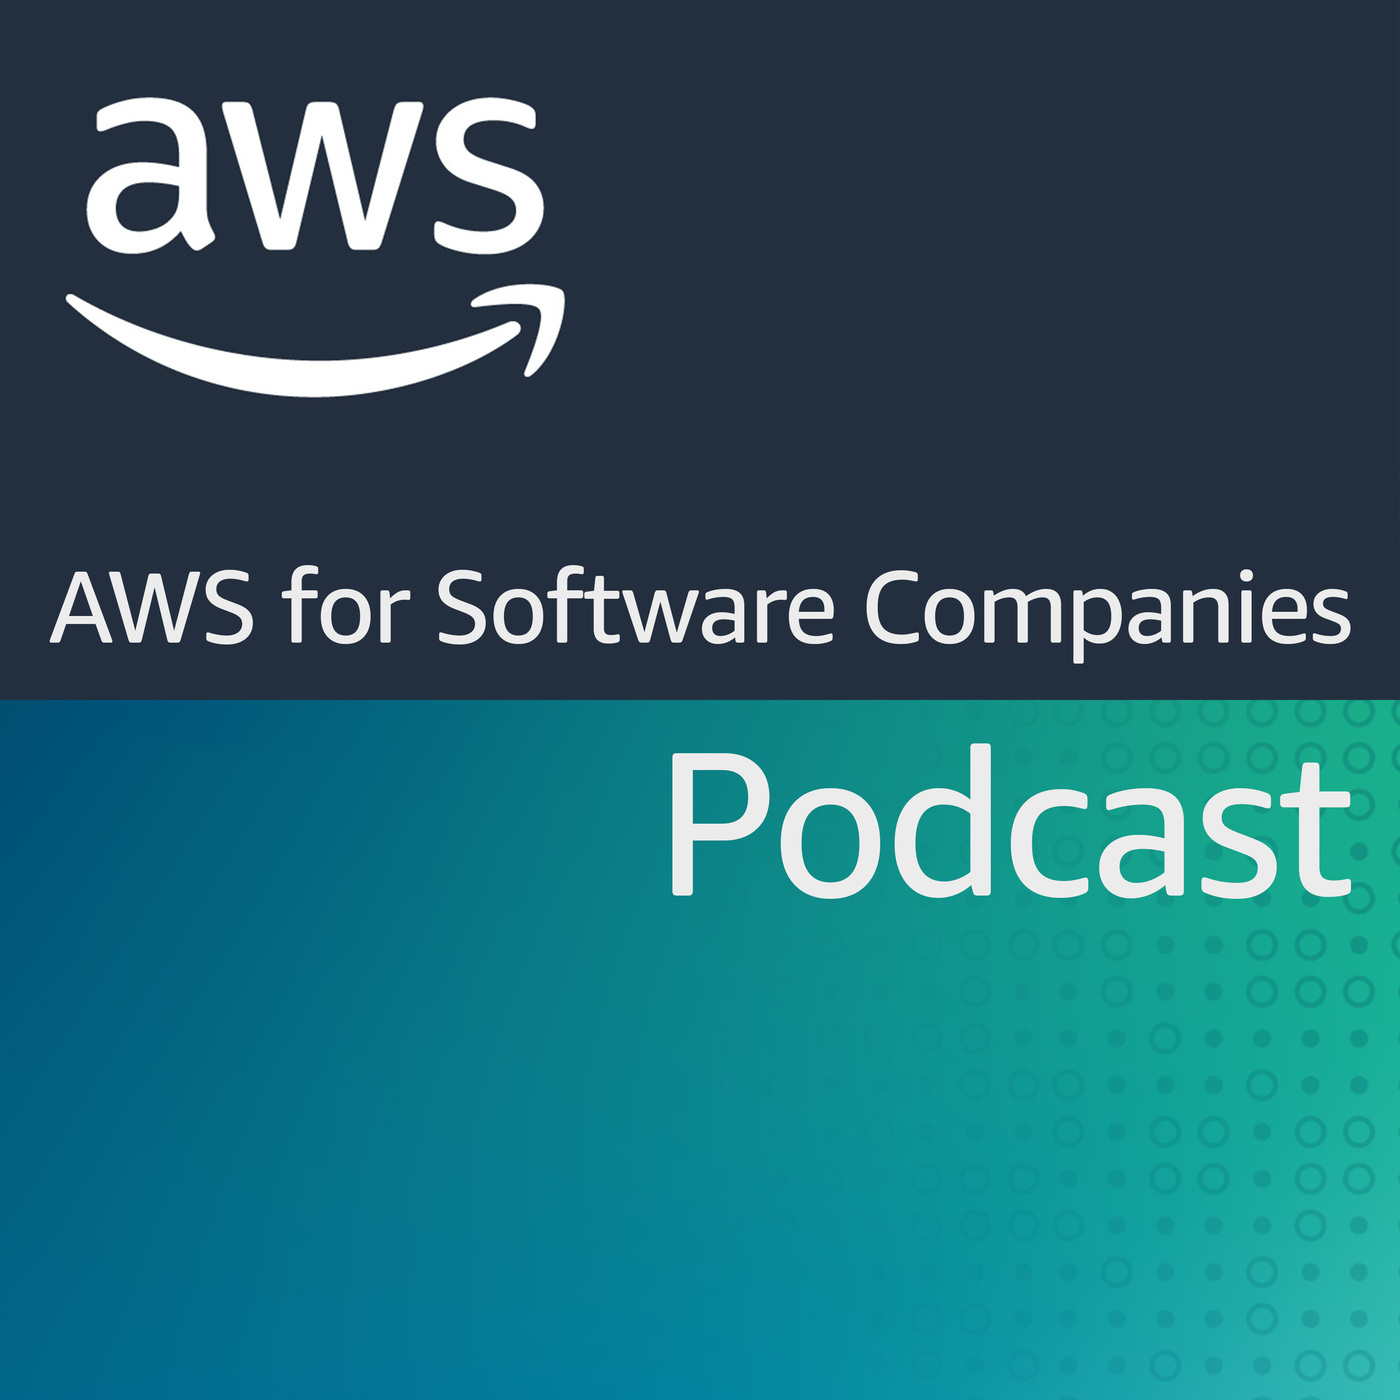 AWS Culture of Innovation   Web Services 